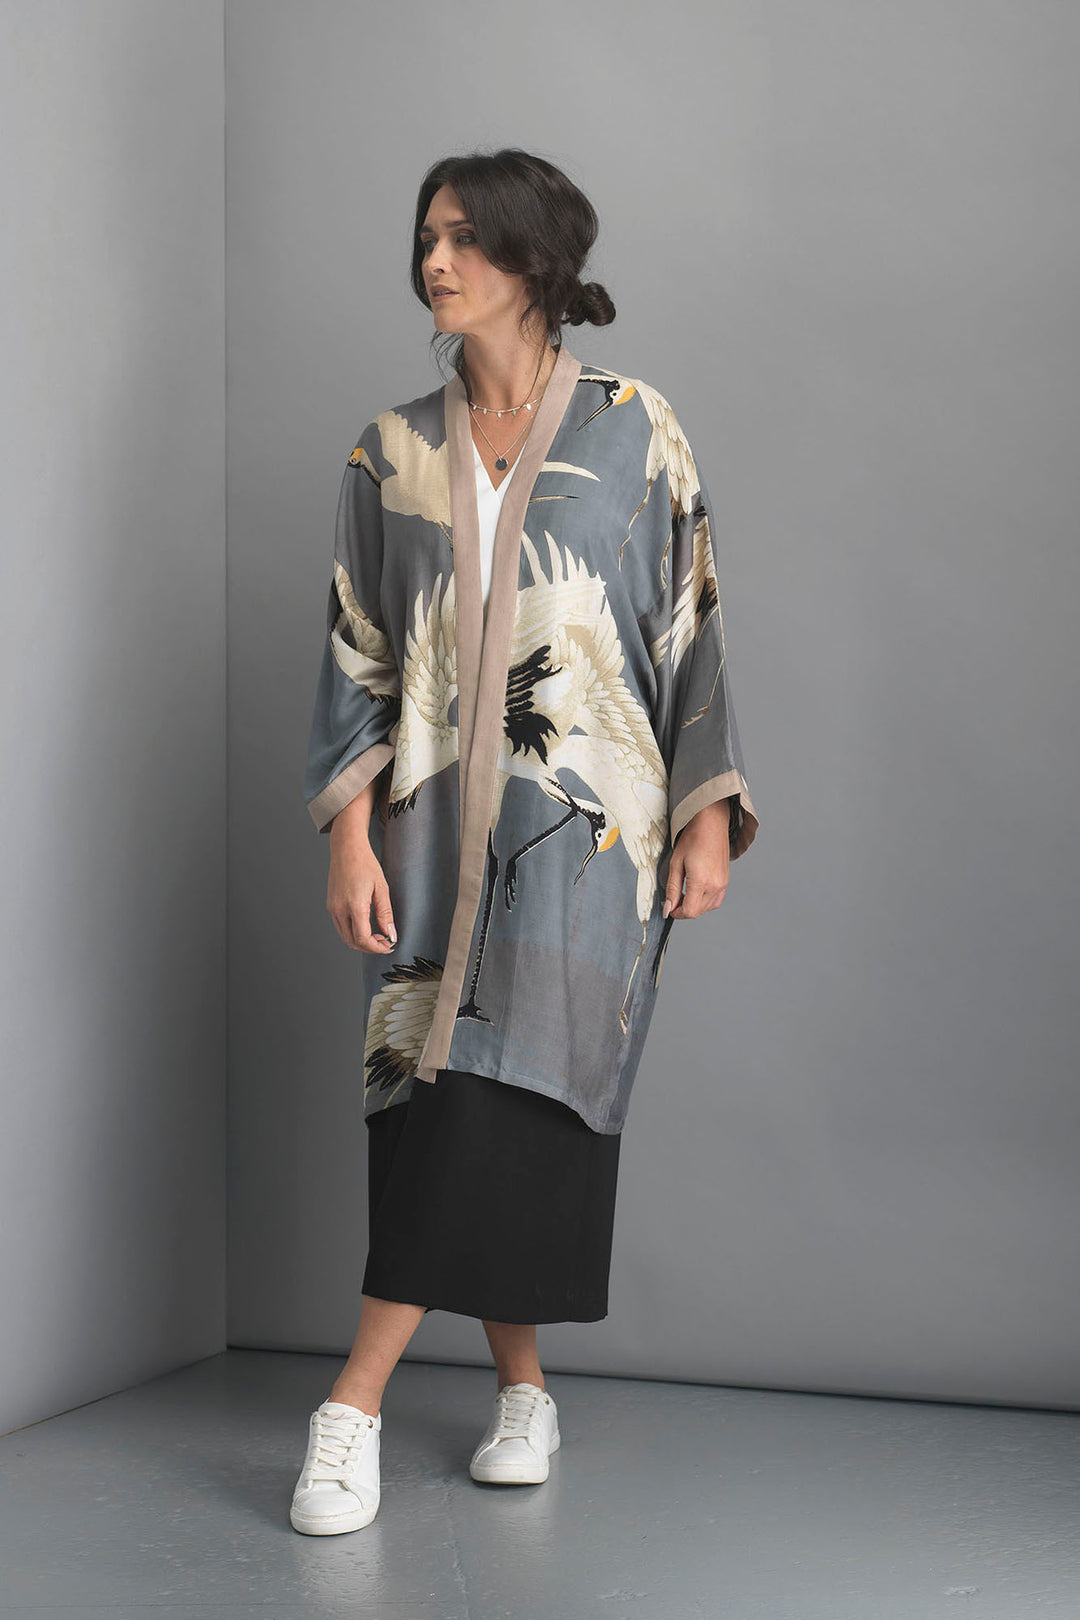 Stork Crane Slate Grey Collar Kimono - Storks and cranes have been a major art deco trend in both fashion and interiors